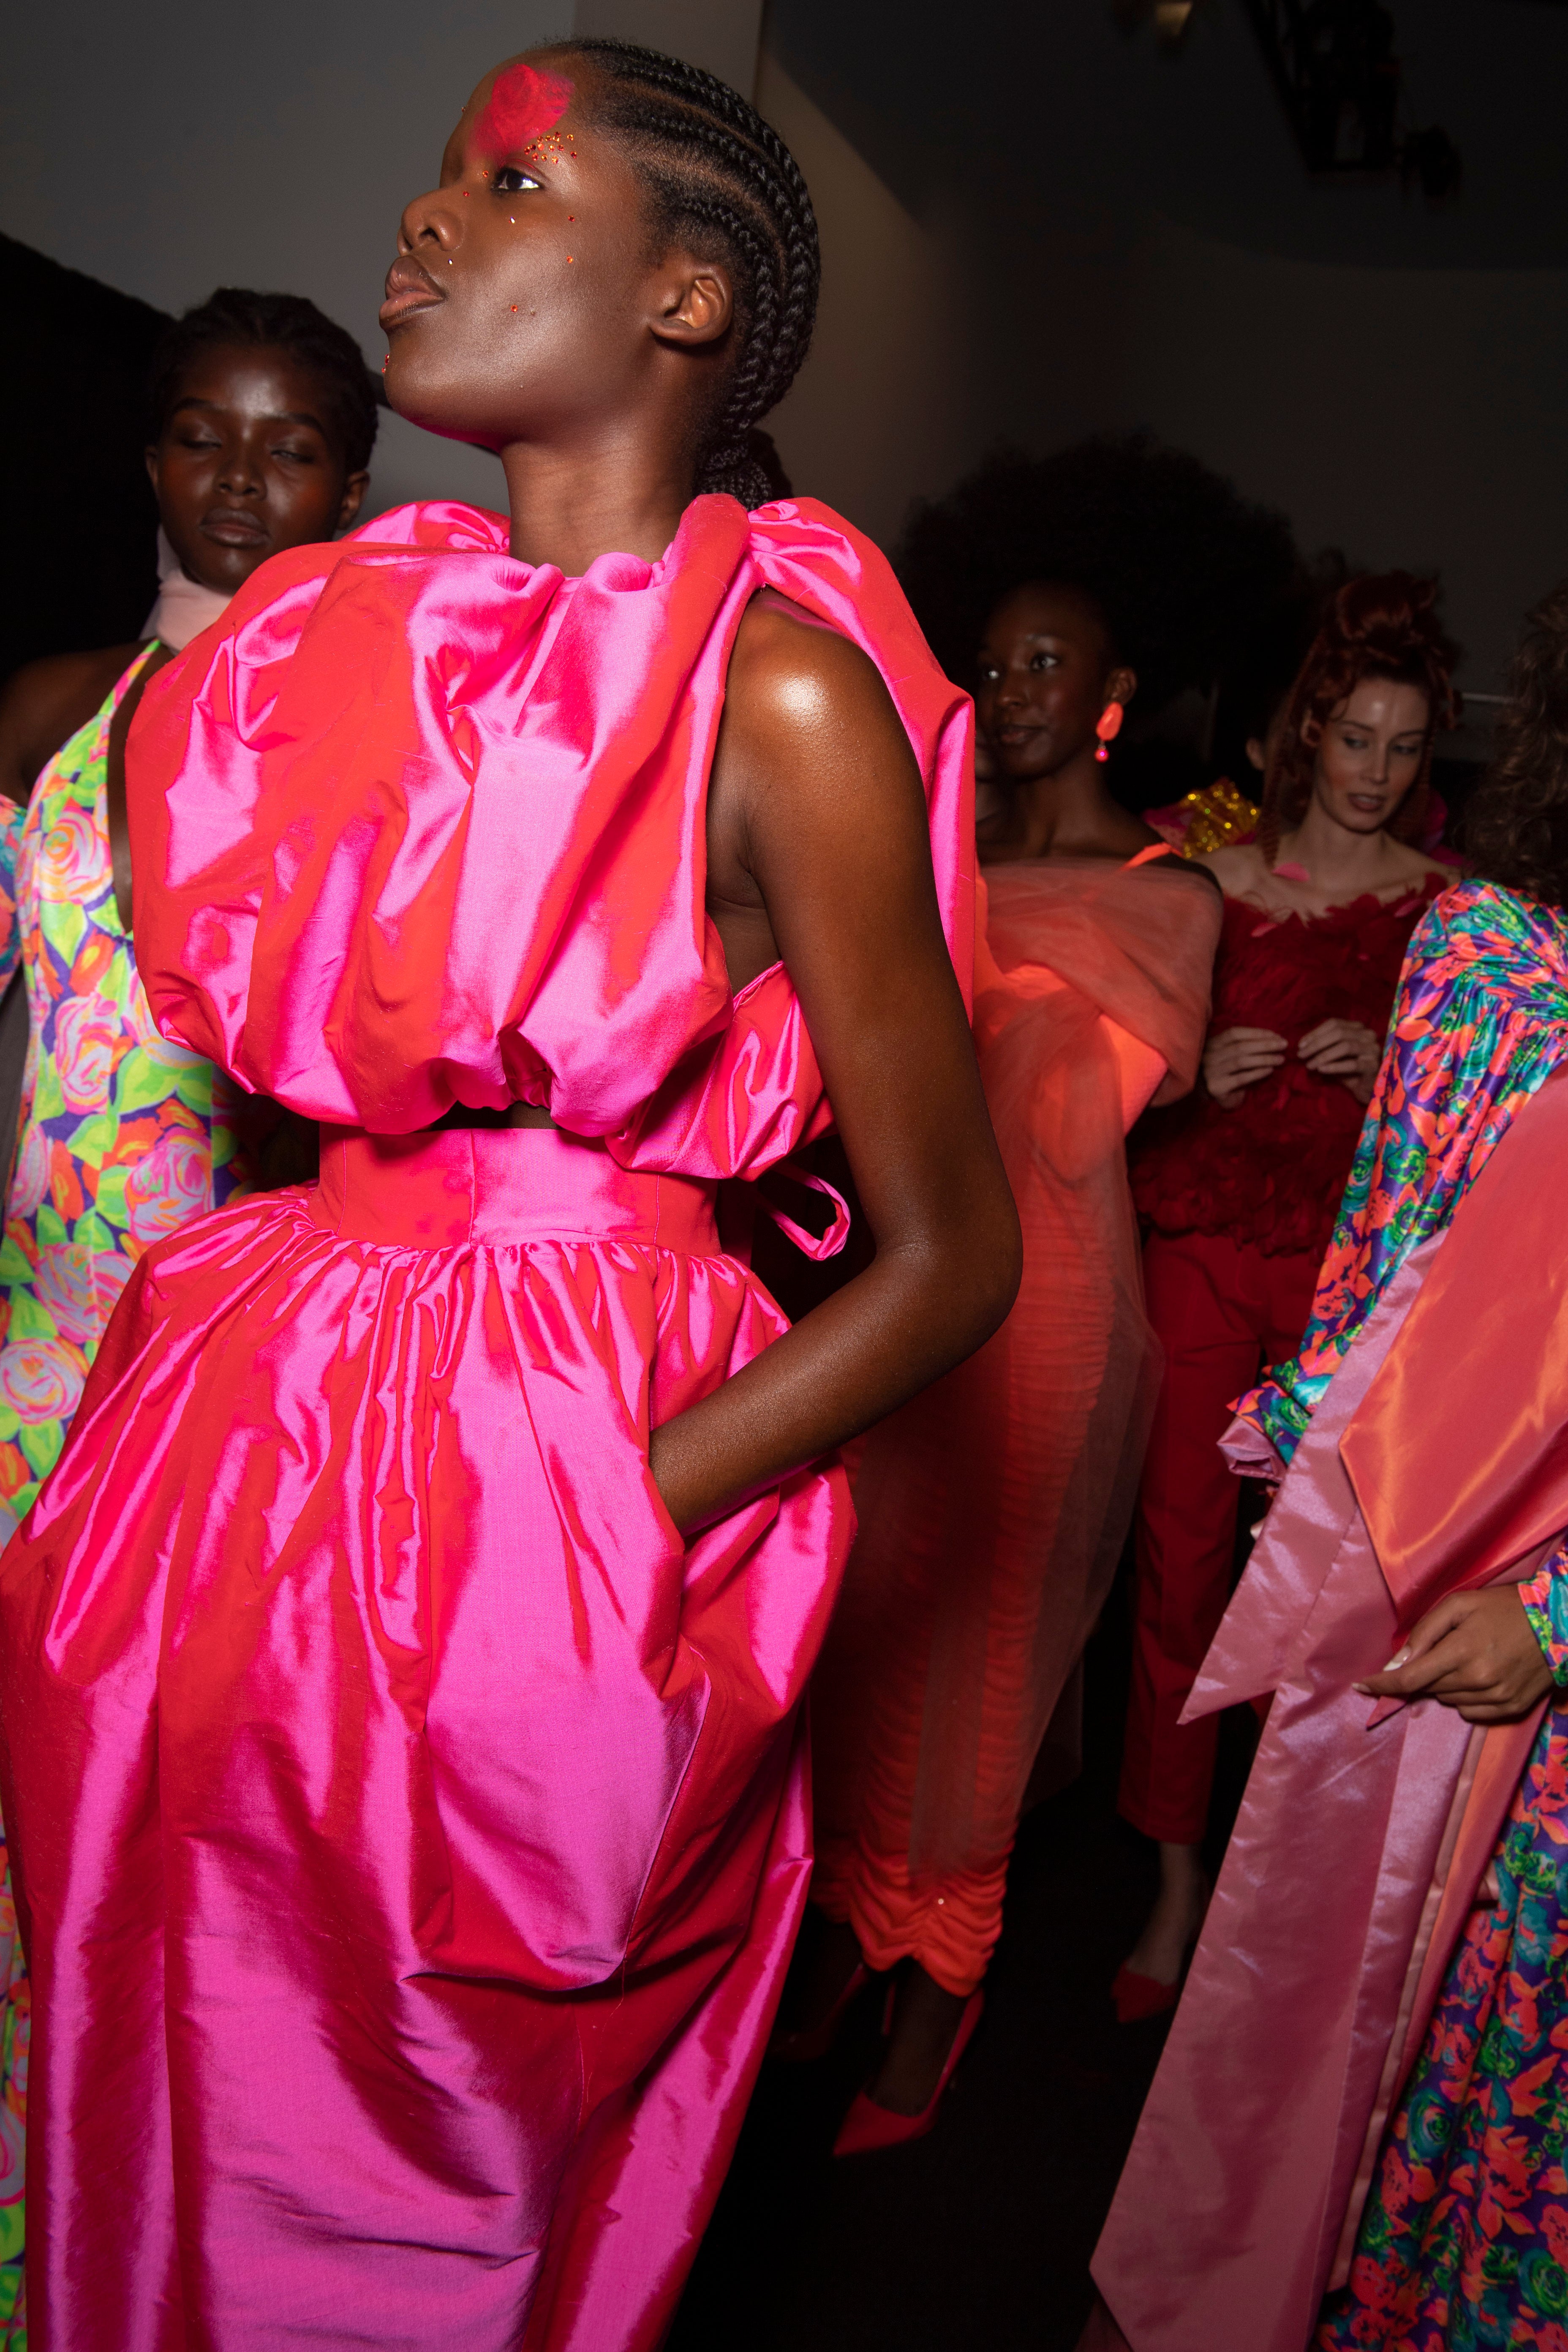 NYFW: A Look Inside The Christopher John Rogers Spring/Summer 2020 Show